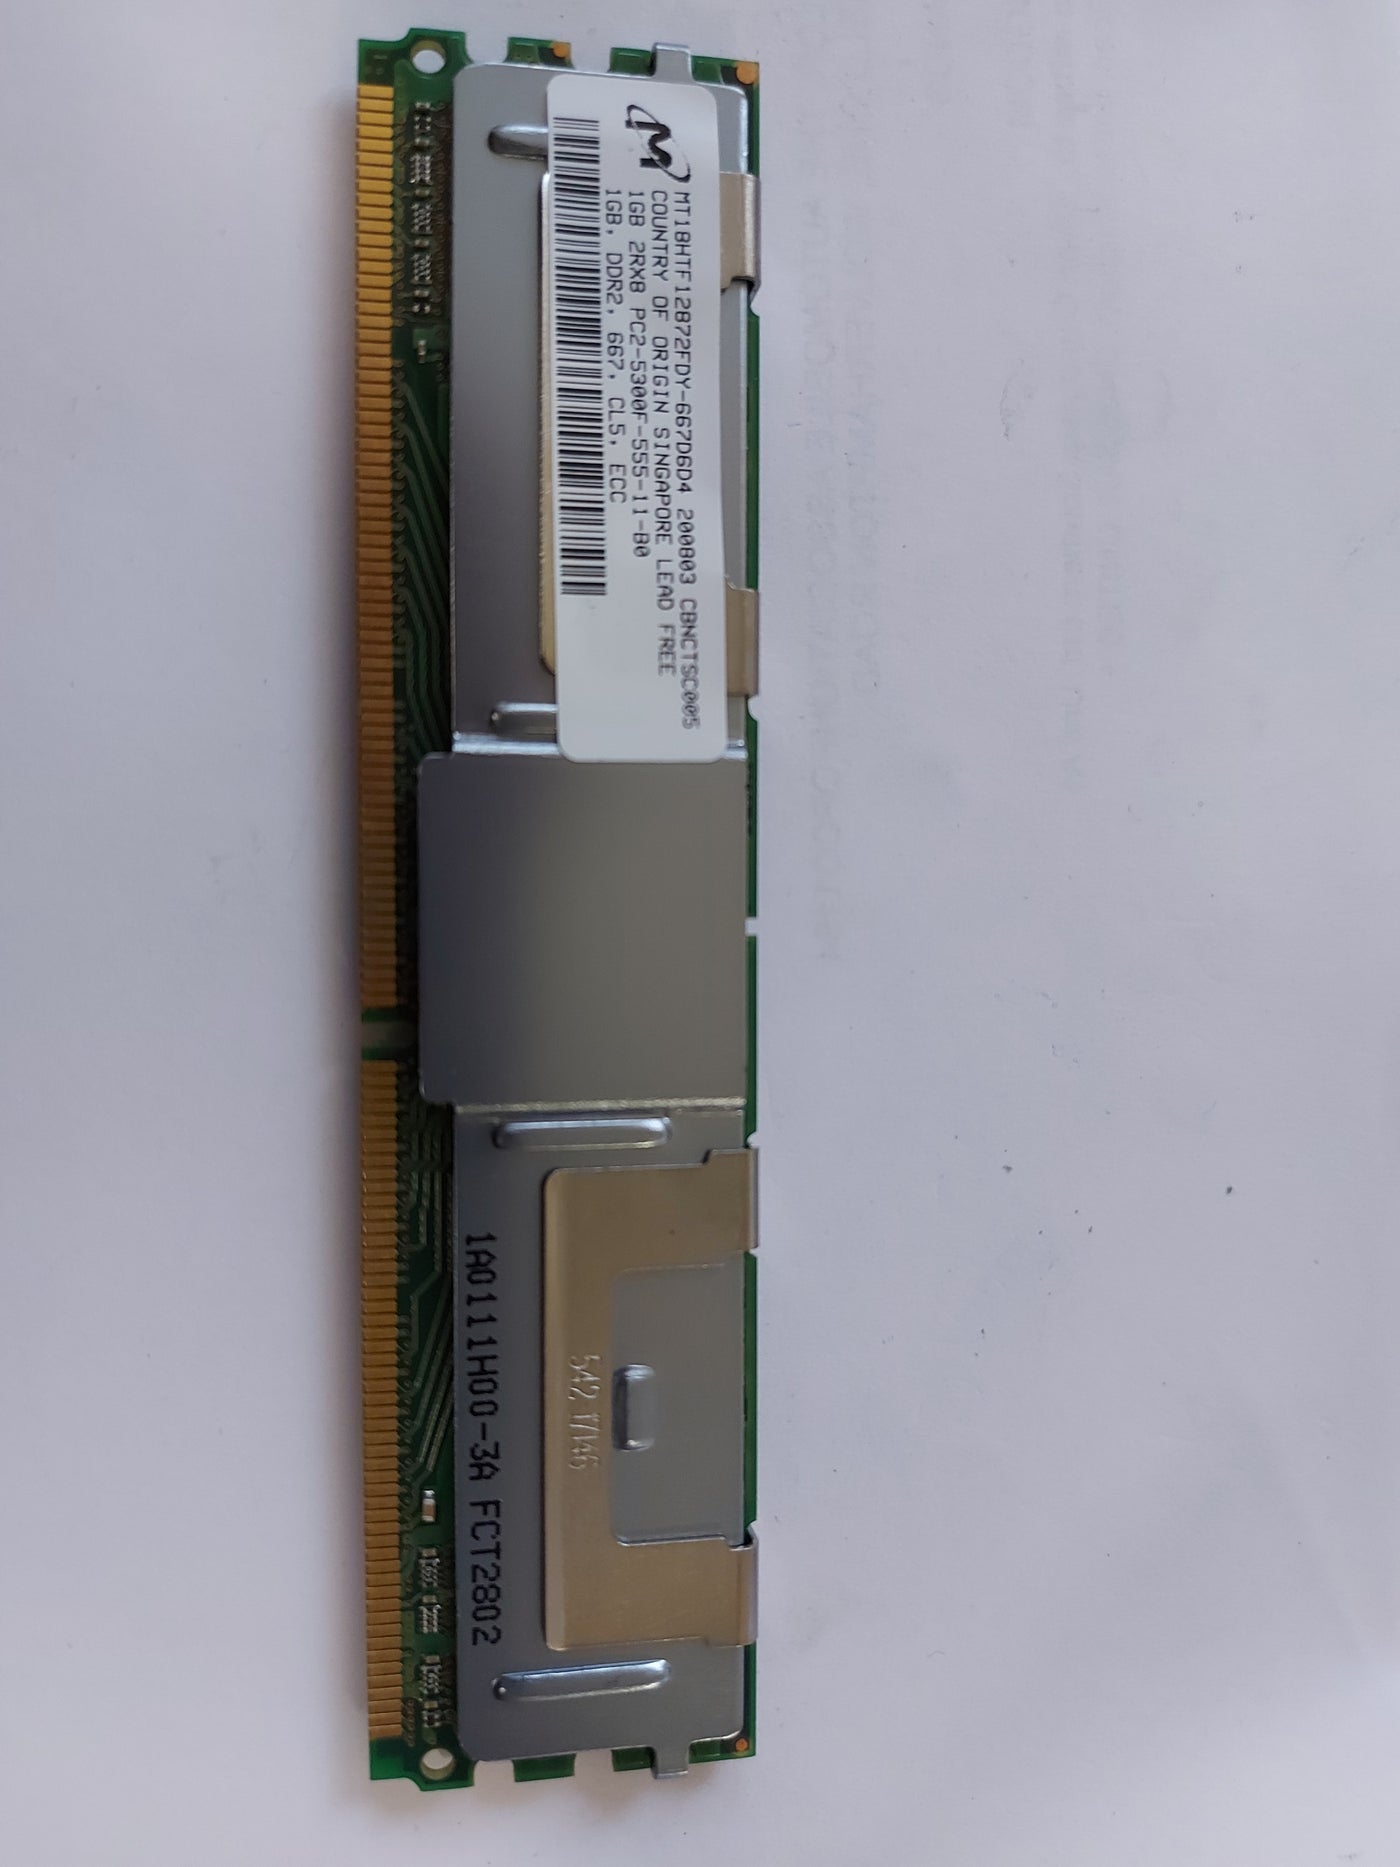 Micron HP 1GB DDR2-667MHz PC2-5300 Fully Buffered CL5 240-Pin DIMM Memory Module (MT18HTF12872FDY-667D6D4 398706-051) REF 